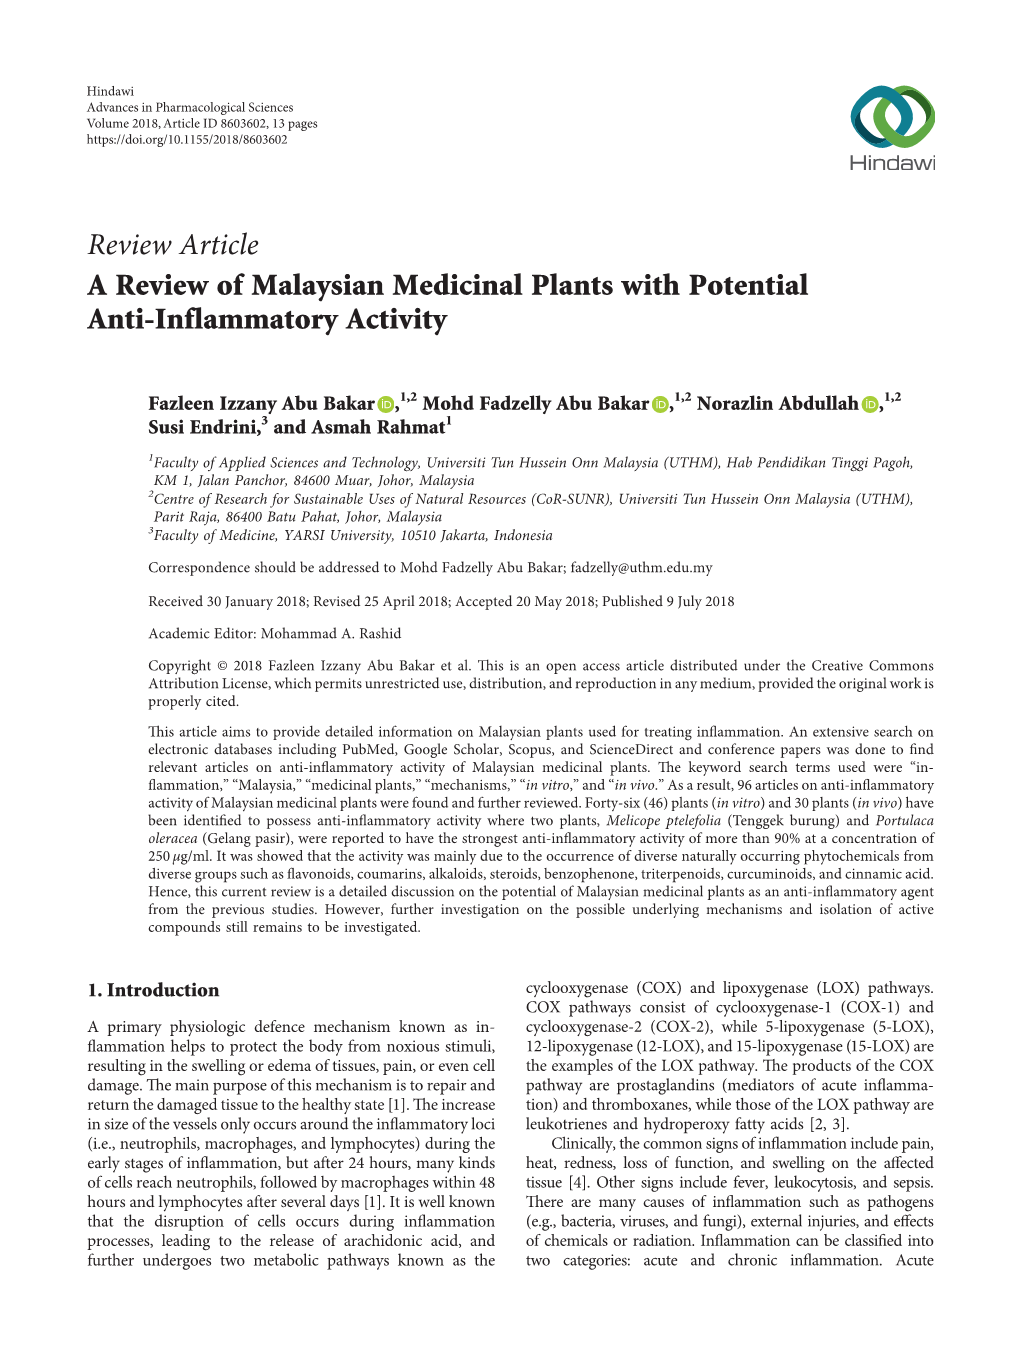 A Review of Malaysian Medicinal Plants with Potential Anti-Inflammatory Activity